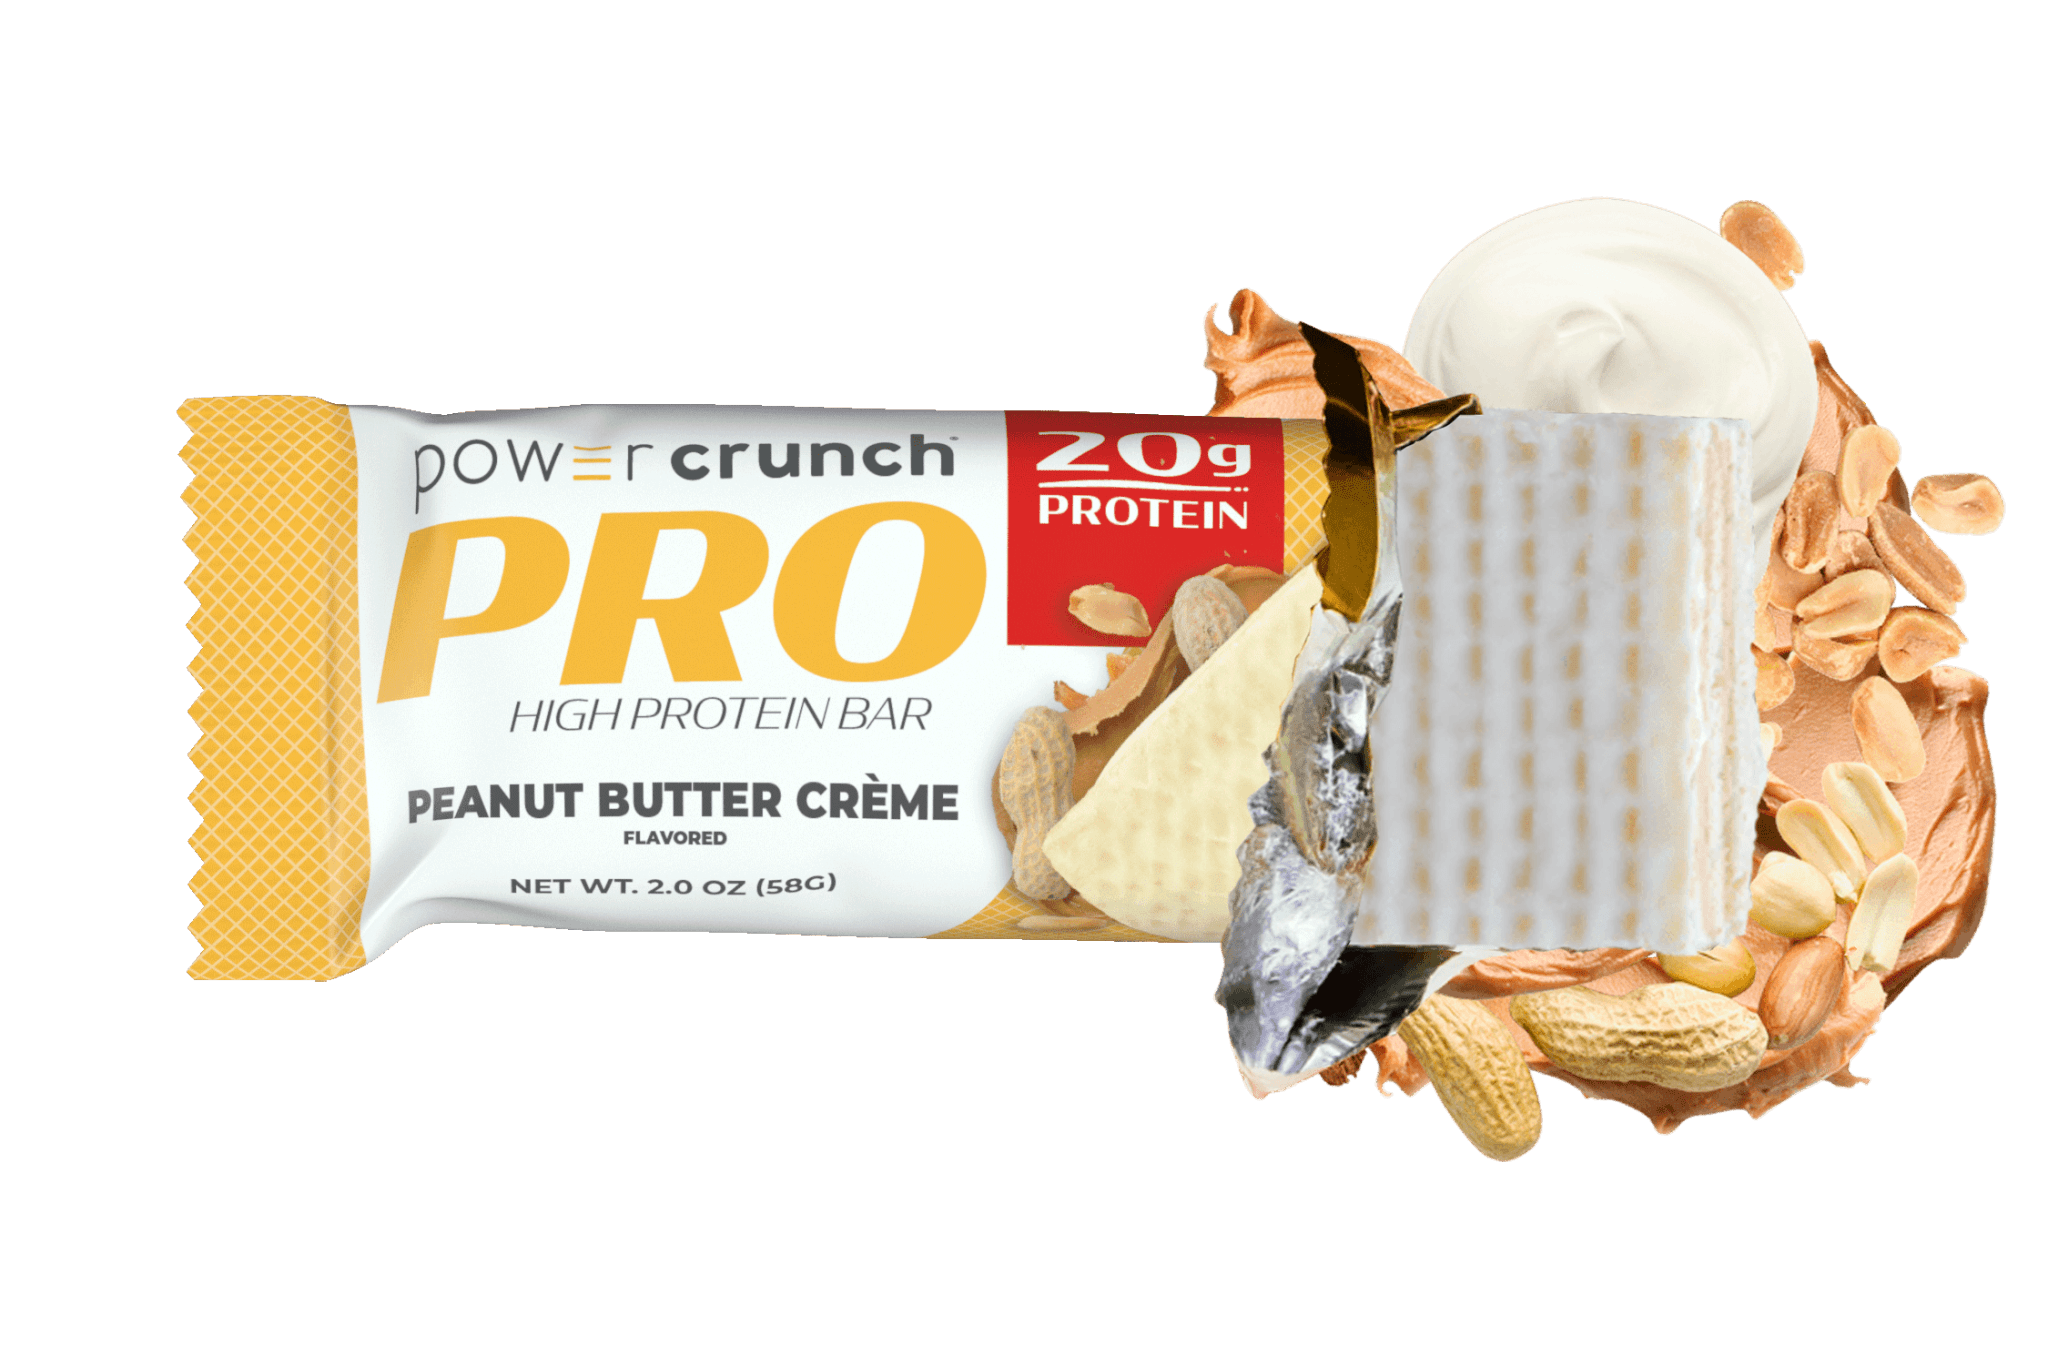 Power Crunch PRO Peanut Butter 20g protein bars pictured with Peanut Butter flavor explosion